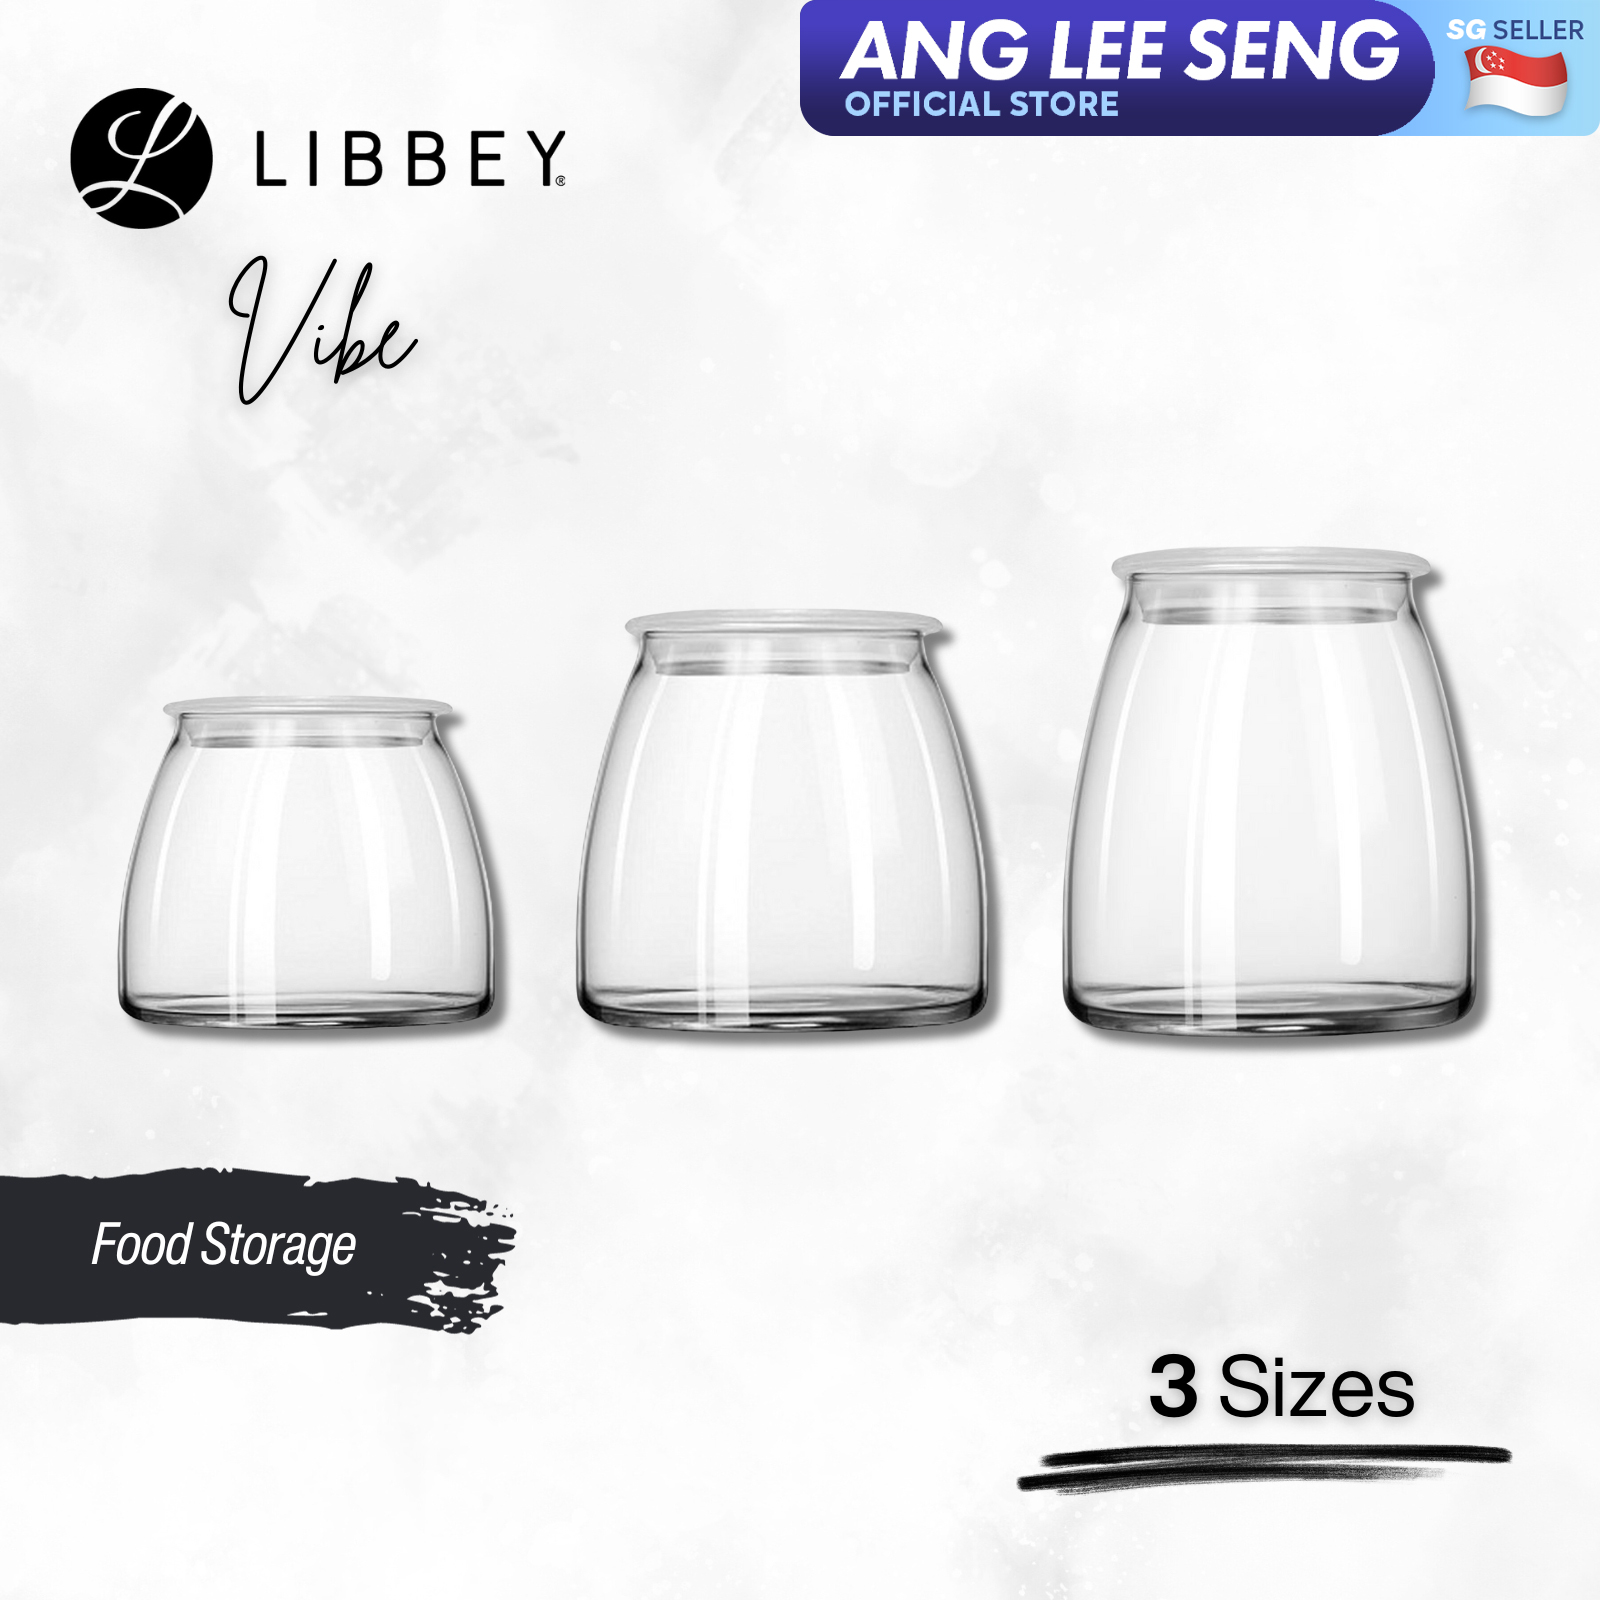 Libbey Vibe Glass Food Storage Container Jar 2-pc Set